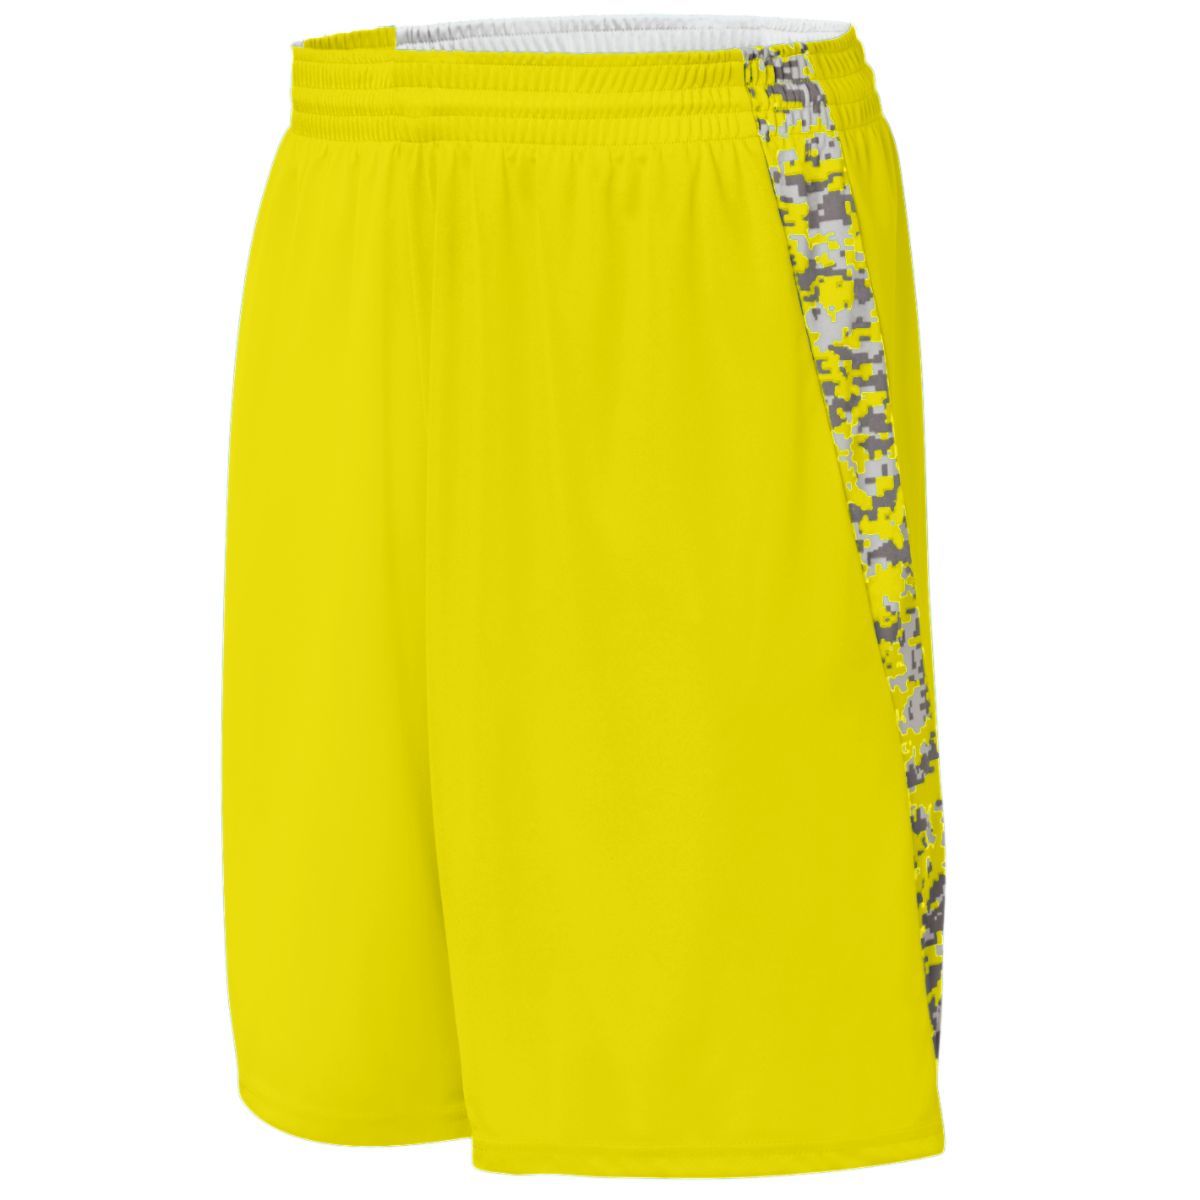 Augusta Sportswear Hook Shot Reversible Shorts in Power Yellow/Power Yellow Digi  -Part of the Adult, Adult-Shorts, Augusta-Products, Basketball, All-Sports, All-Sports-1 product lines at KanaleyCreations.com